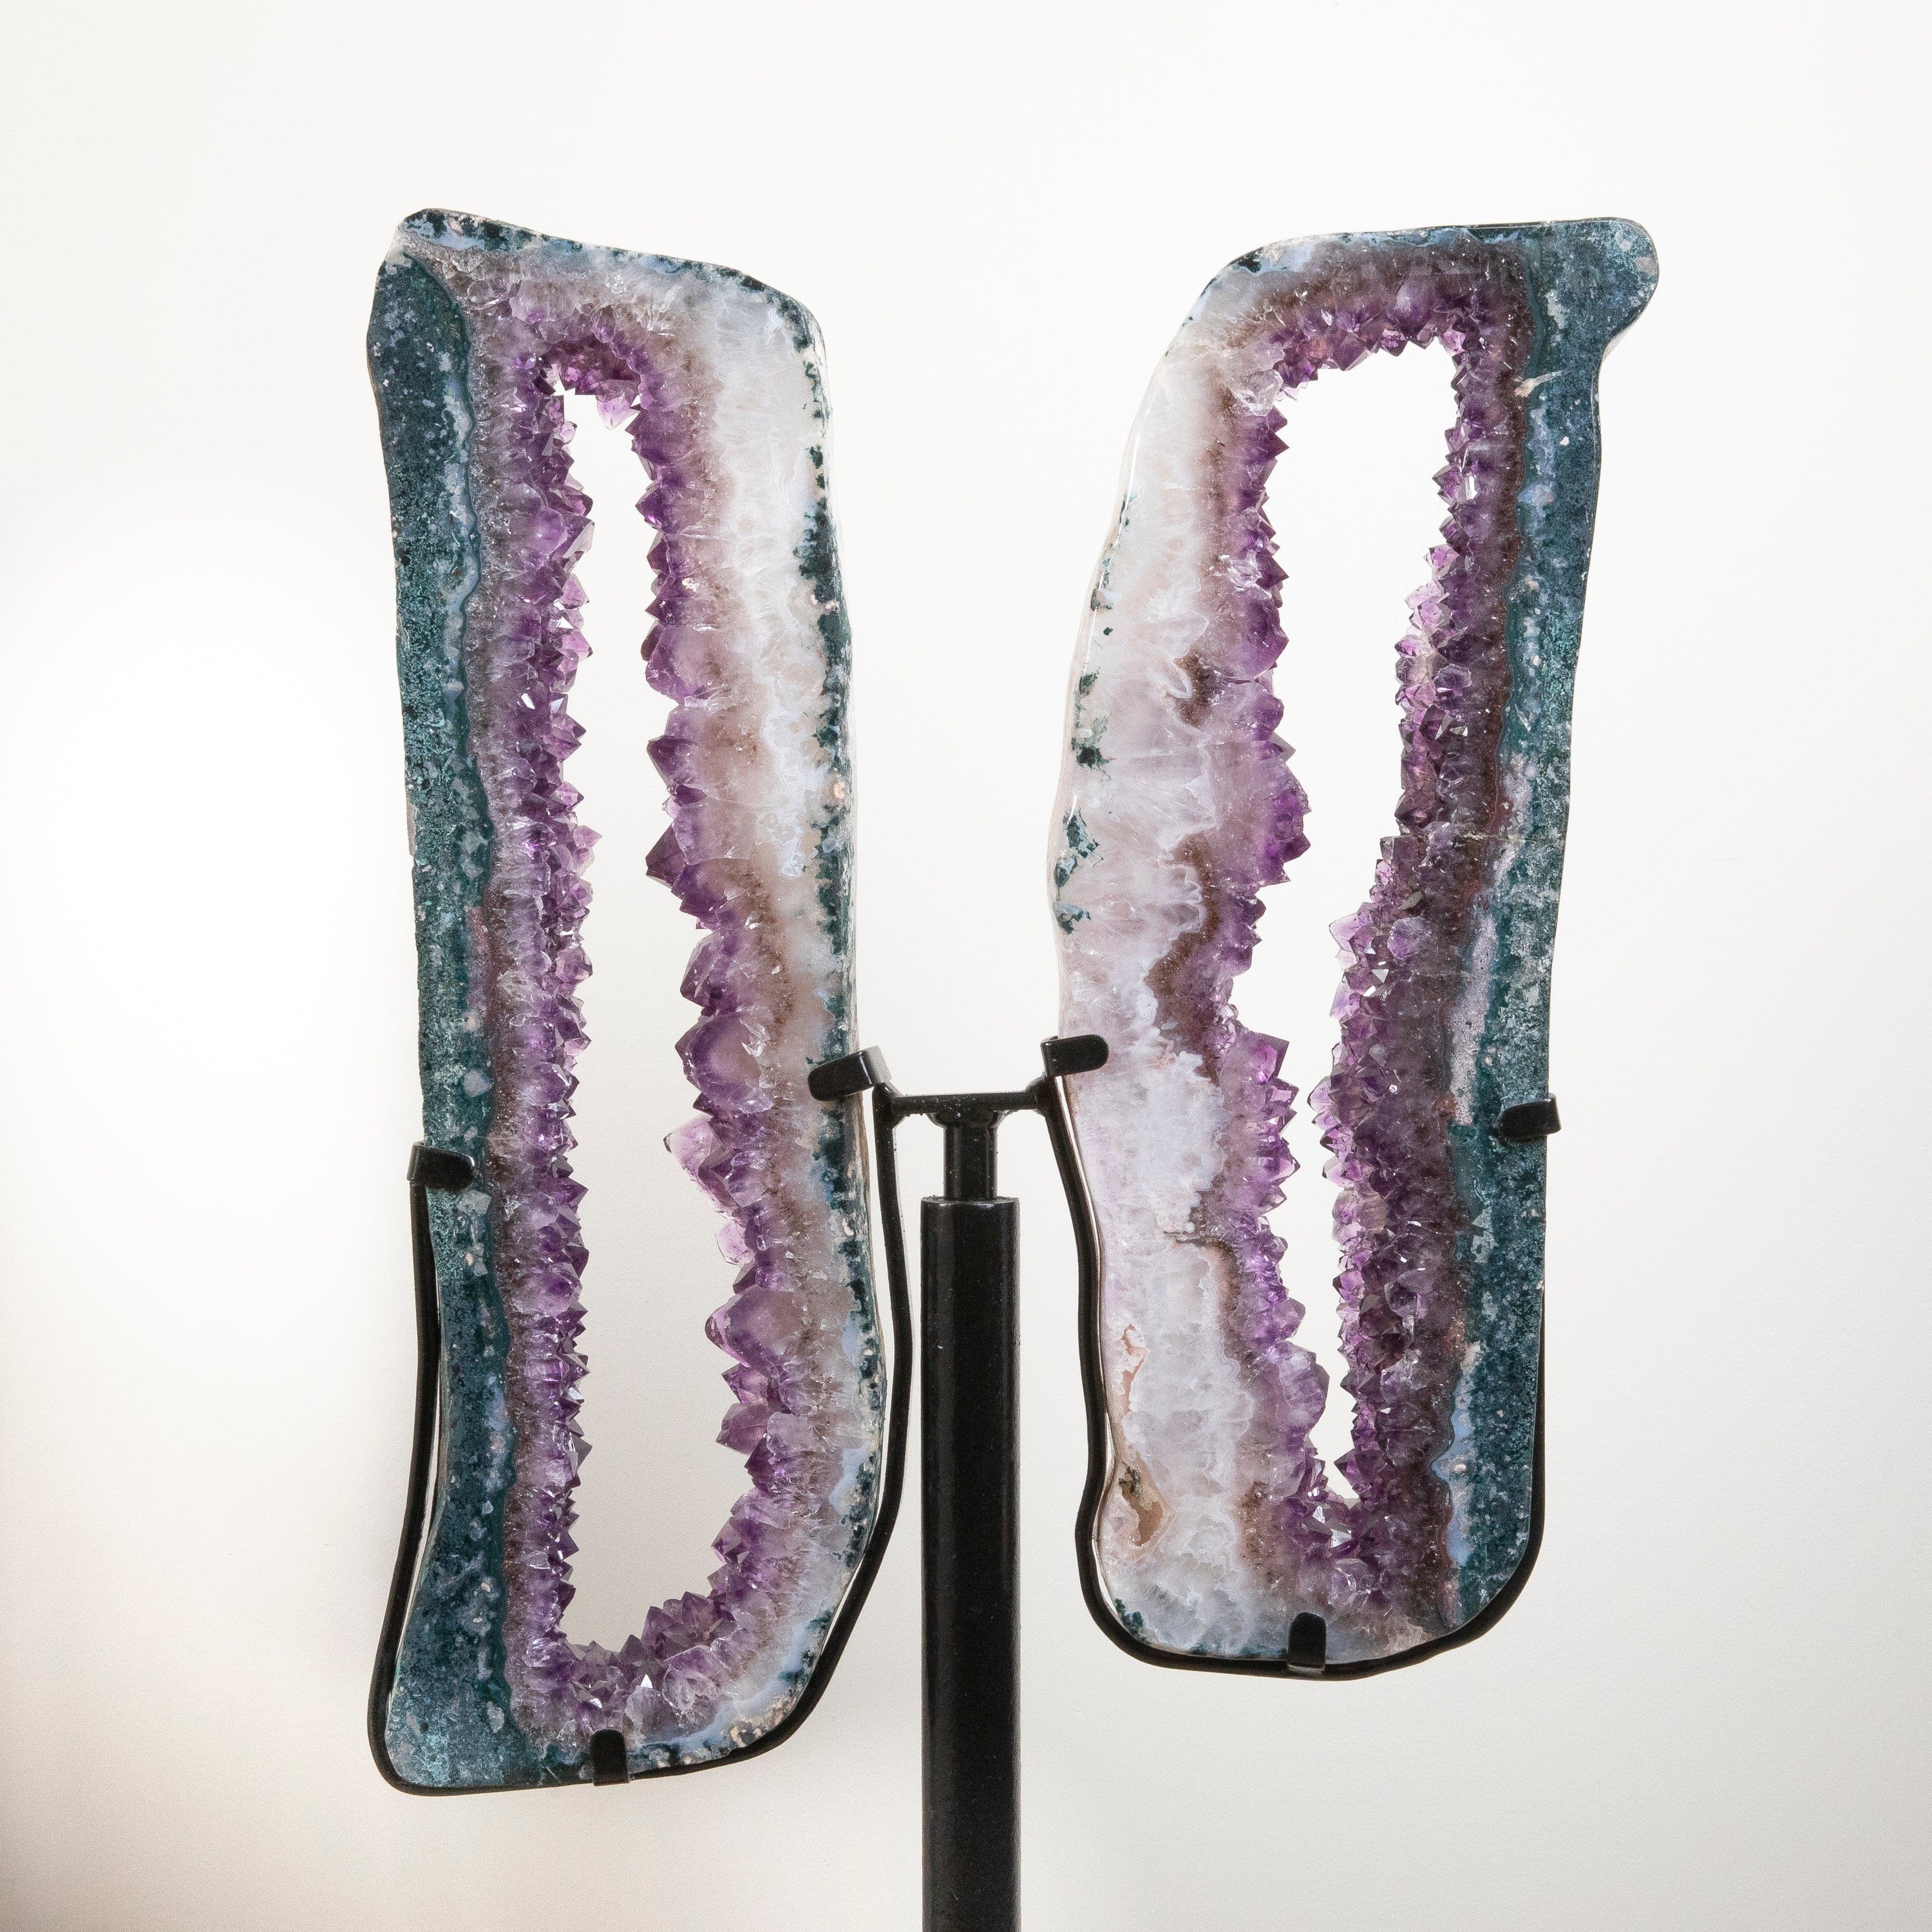 Kalifano Amethyst Amethyst Geode Wings from Brazil on Custom Stand- 38" / 39 lbs BAG8000.009